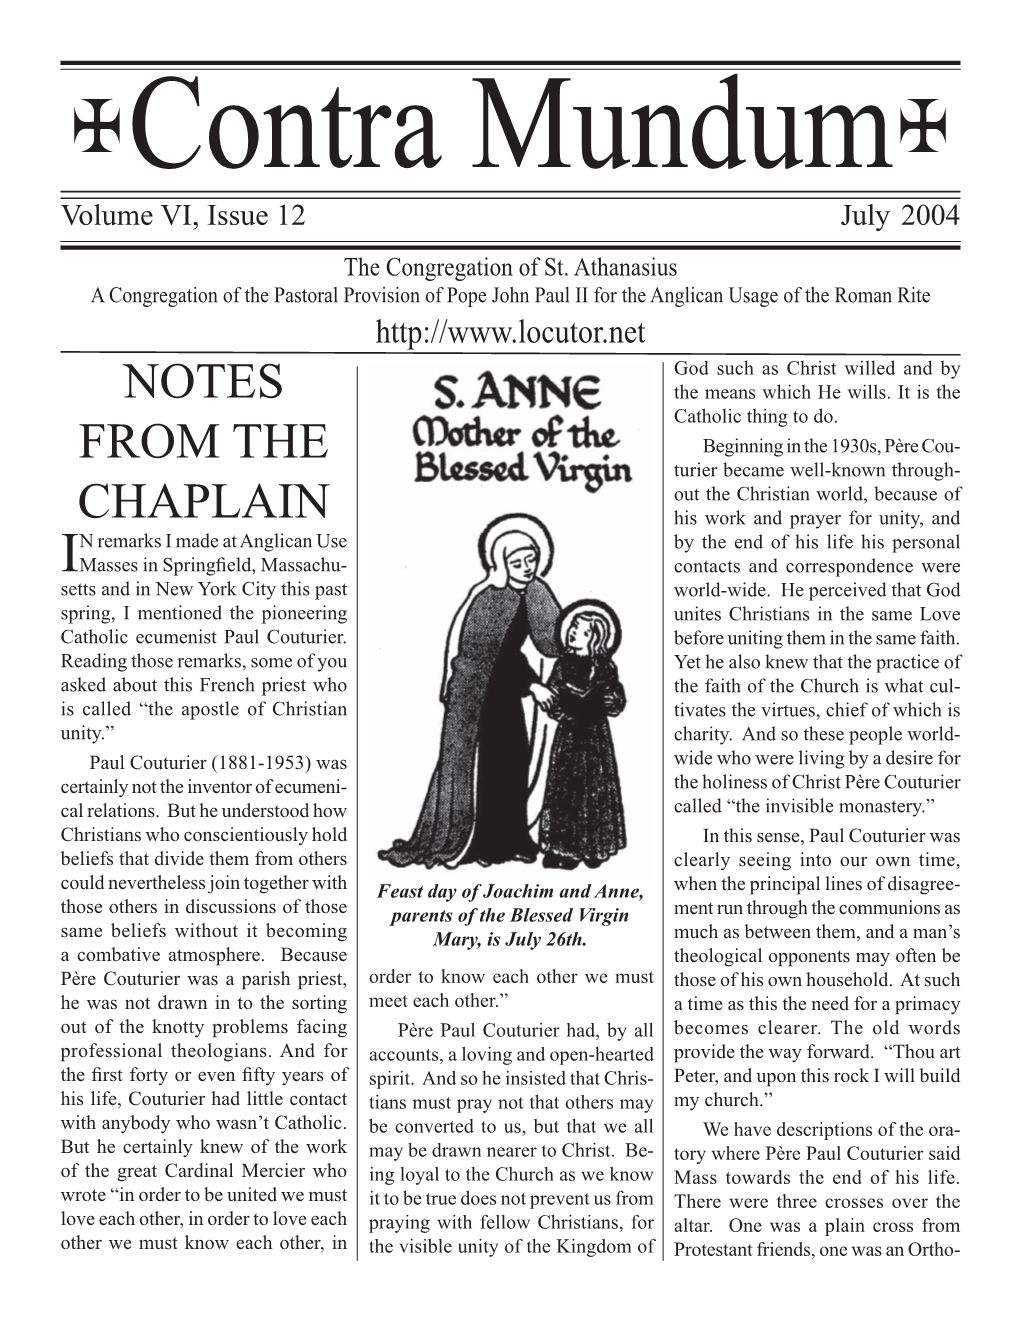 Notes from the Chaplain